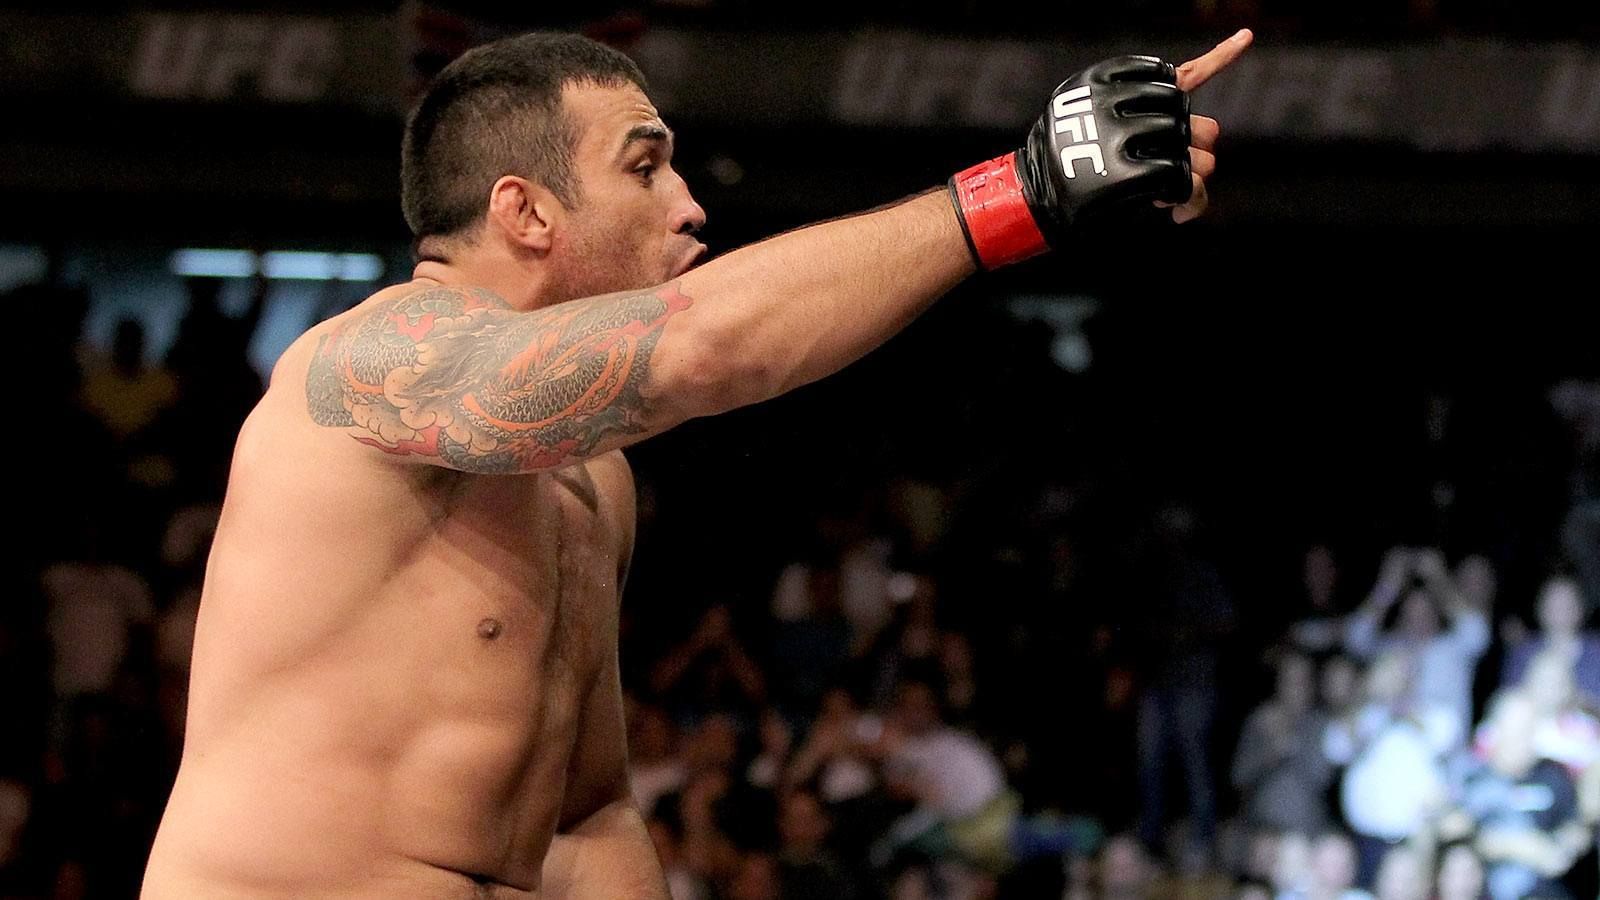 Fabricio Werdum points to the crowd after UFC win